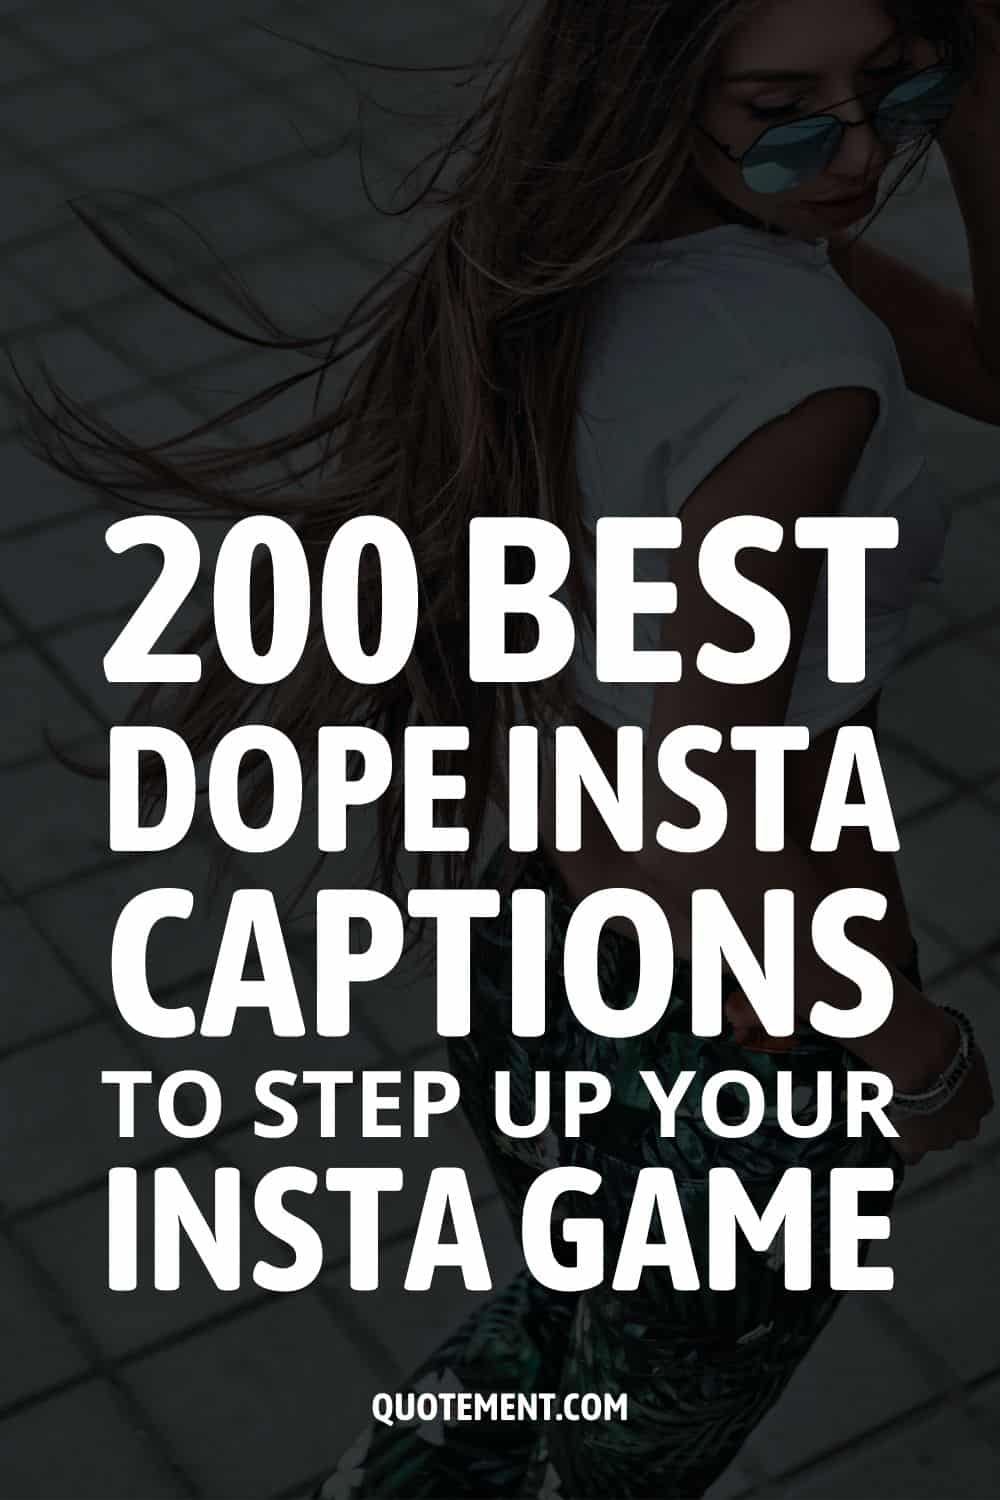 200 Best Dope Insta Captions To Step Up Your Insta Game
